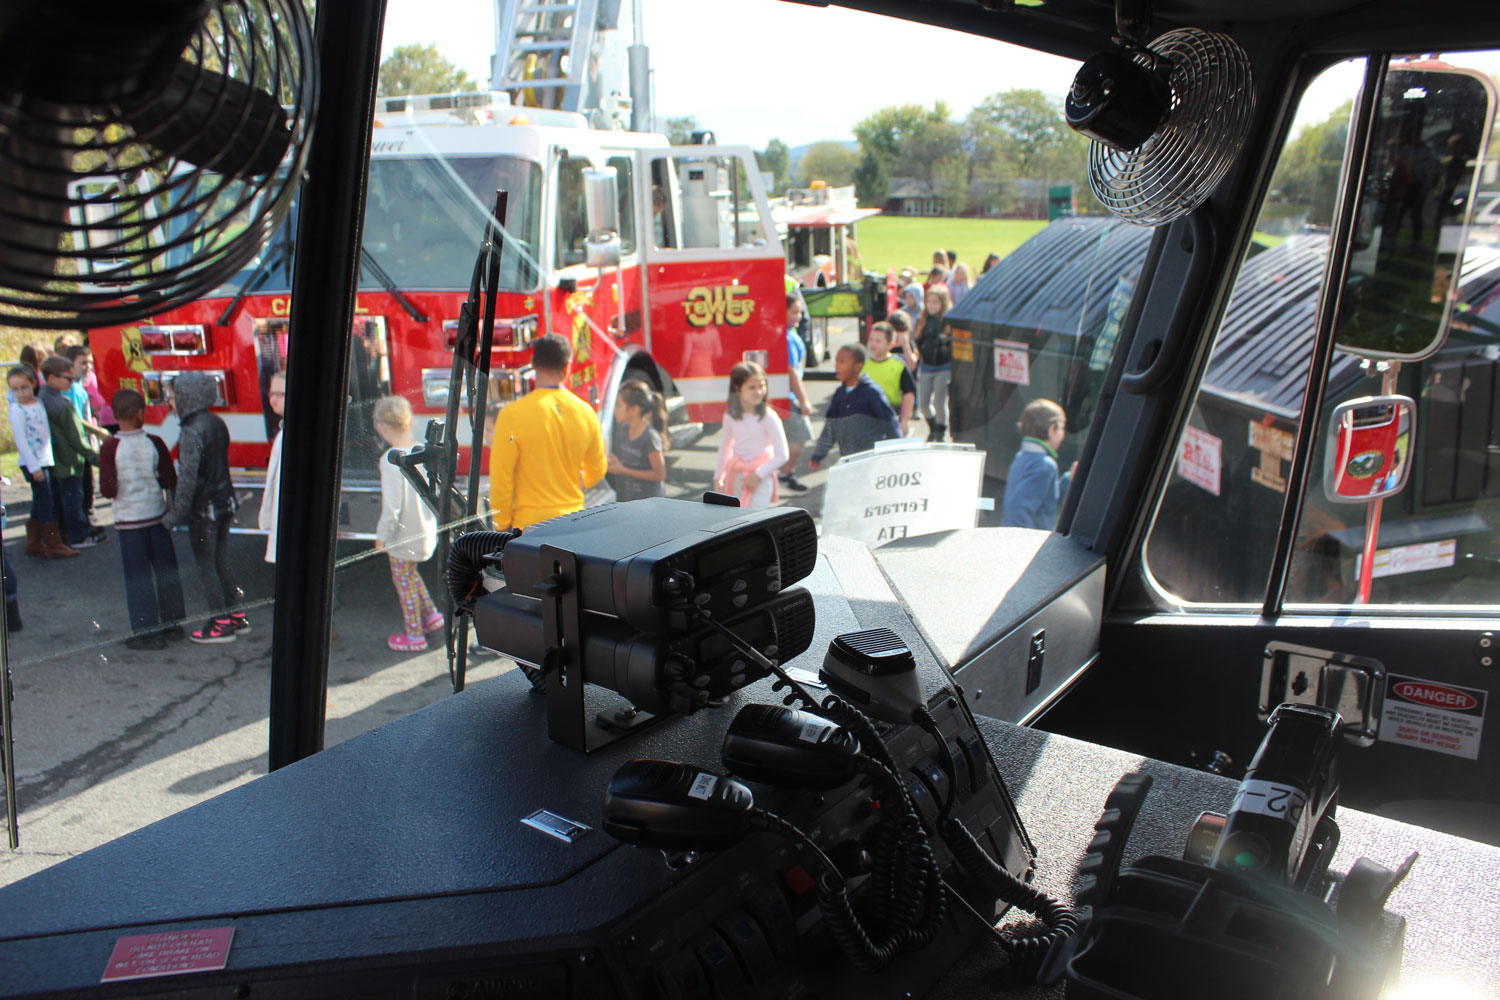 Students check out the ladder truck